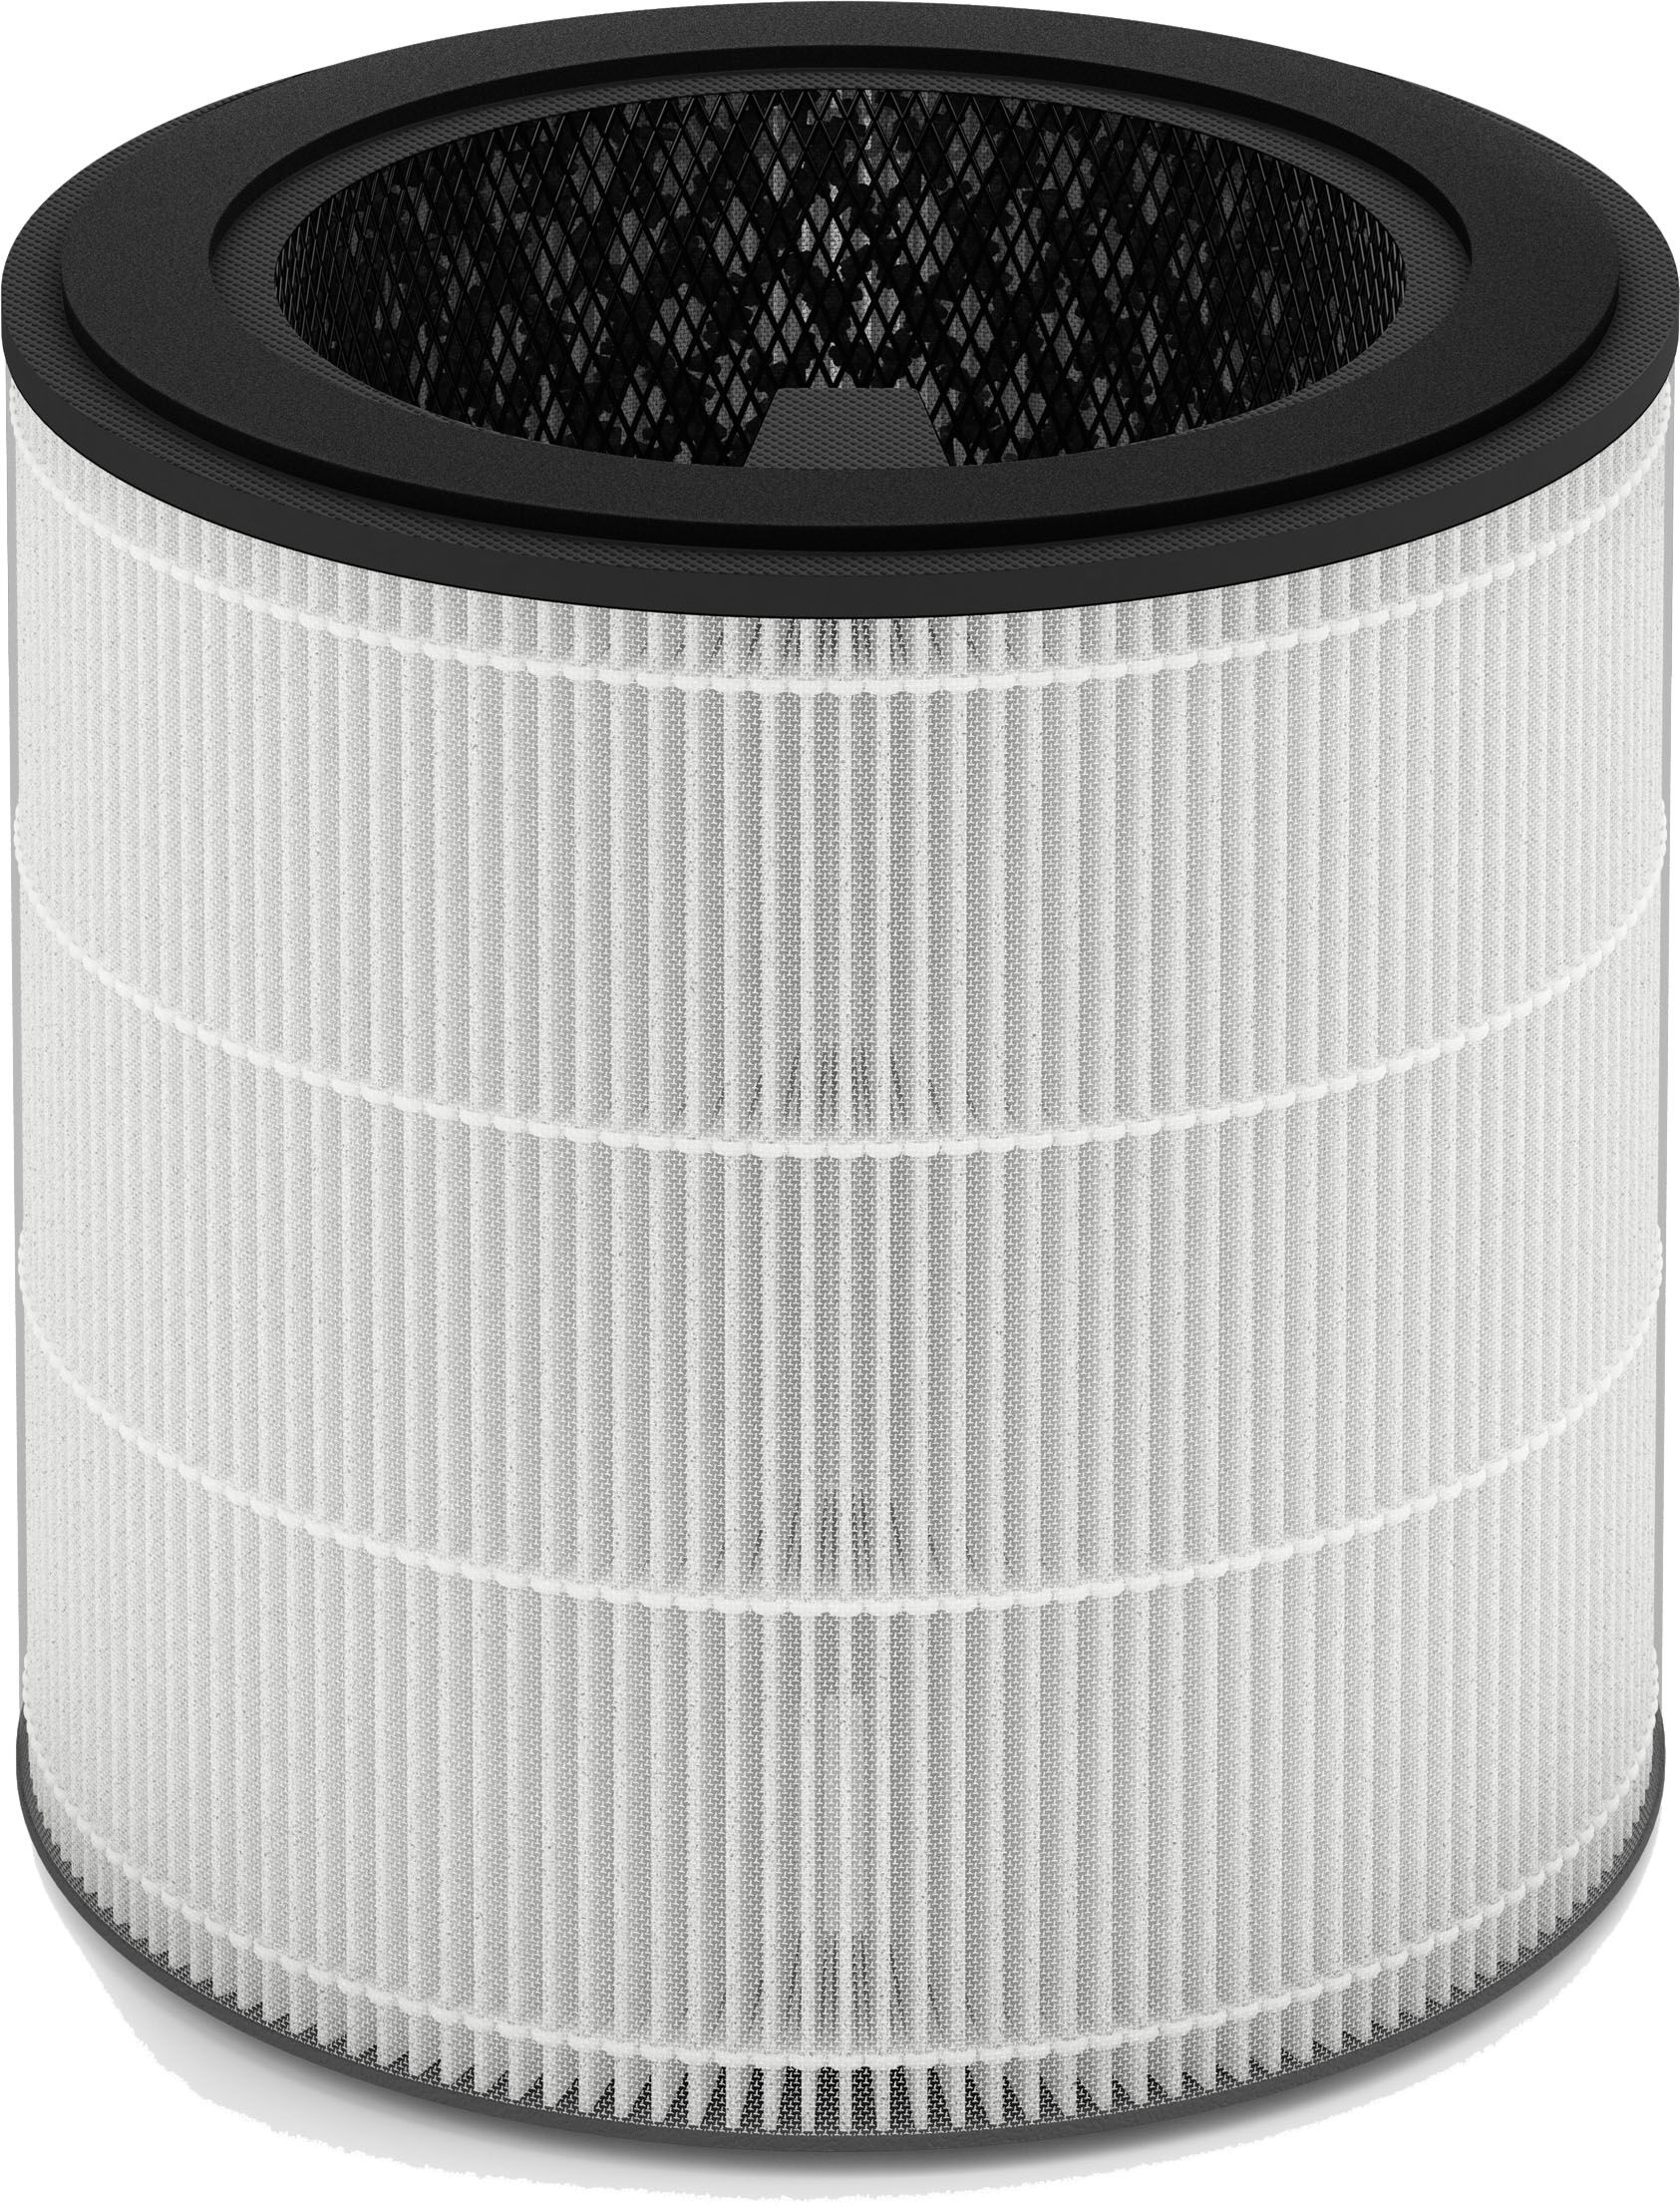 Philips NanoProtect Filter »Serie 2 FY0293/30«, (Packung, 1 tlg.) weiss  1 St.